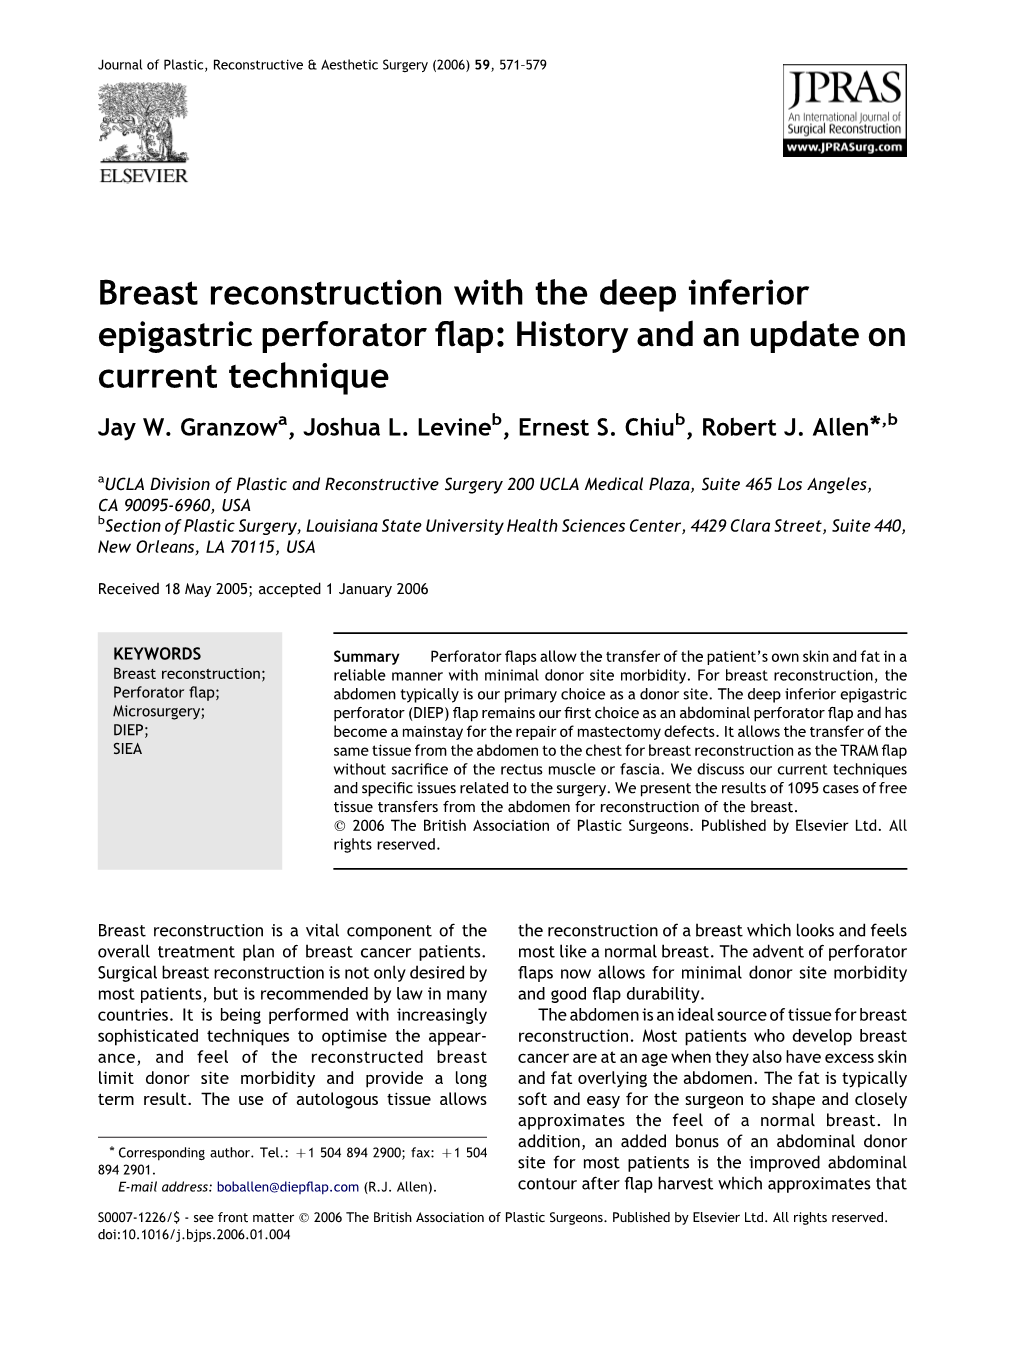 Breast Reconstruction with the Deep Inferior Epigastric Perforator Flap